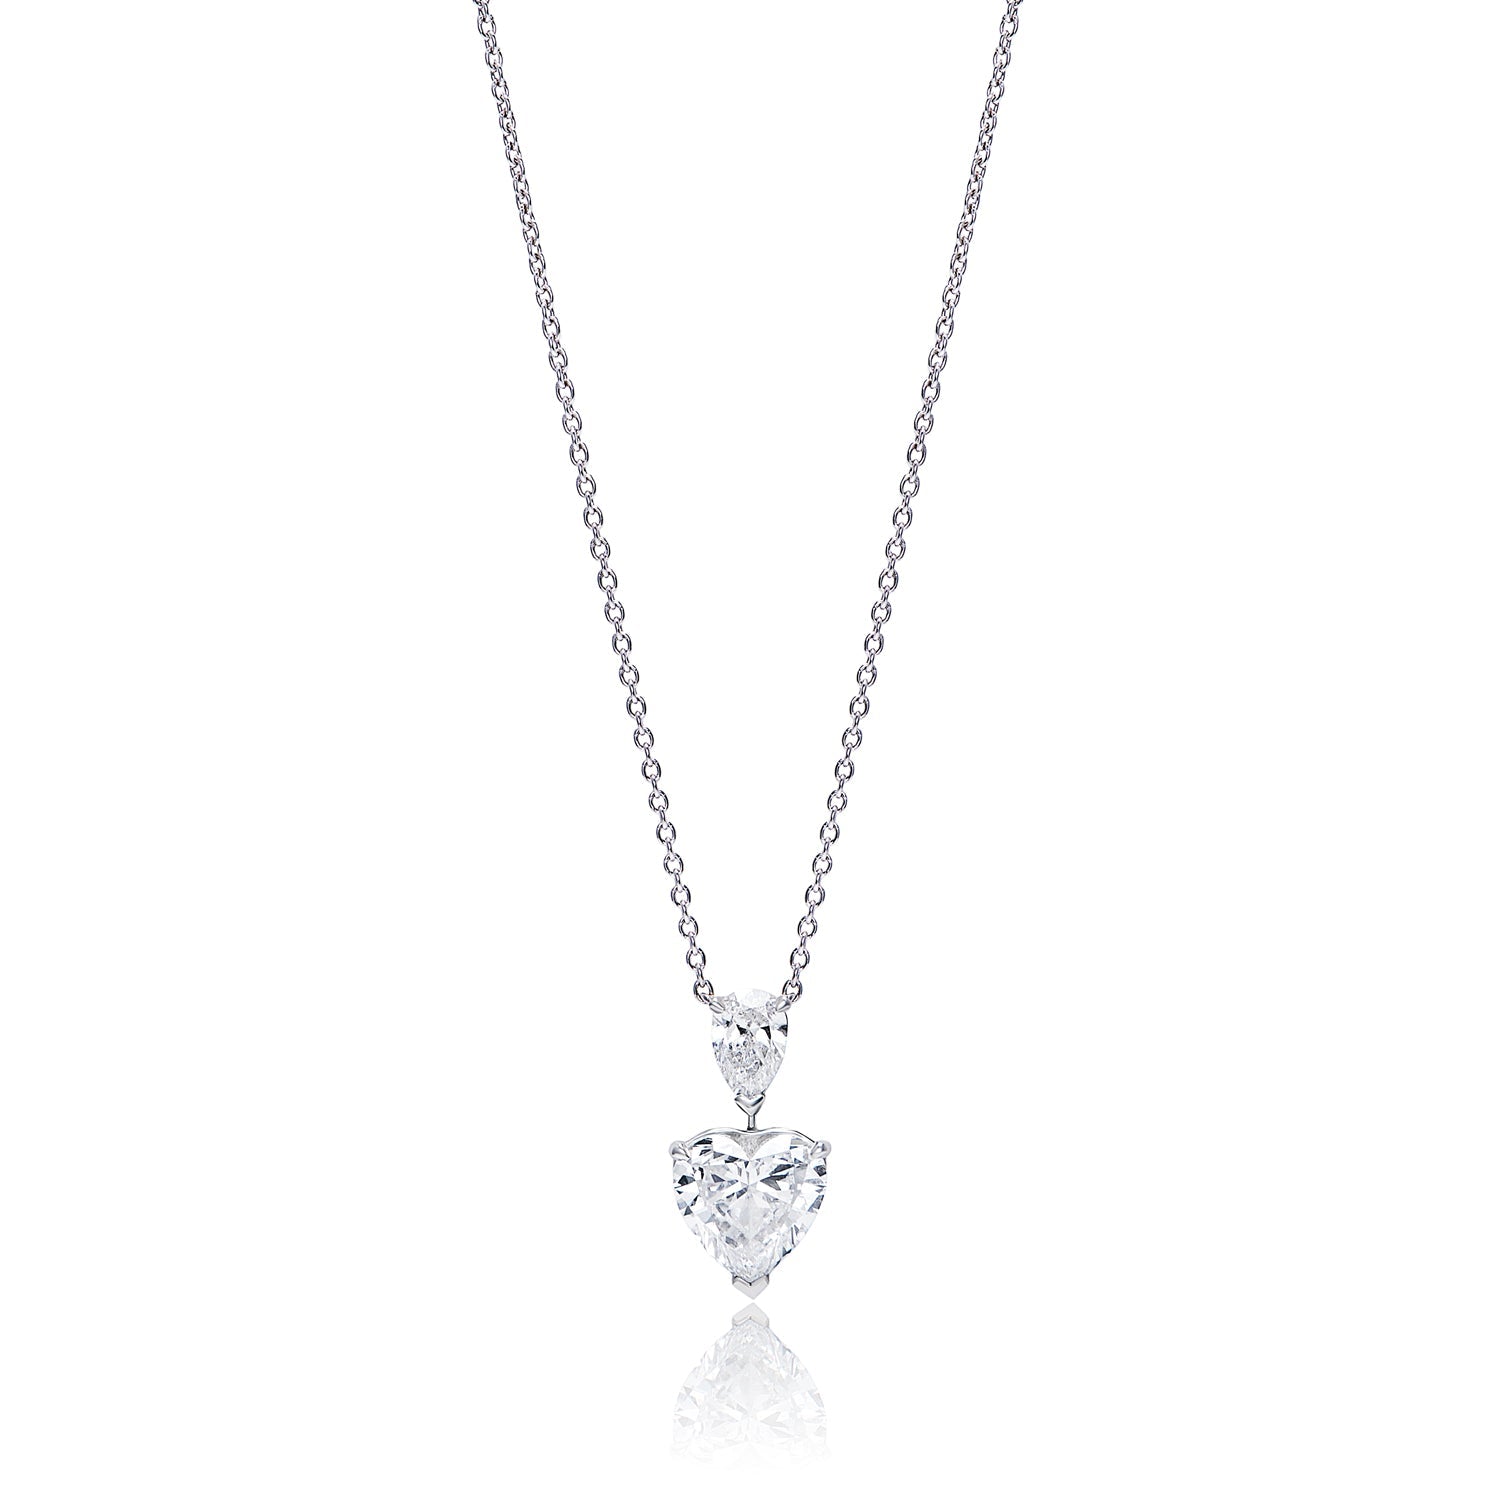 GIA Certified Pink Diamond Heart Shape Pendant Necklace For Sale